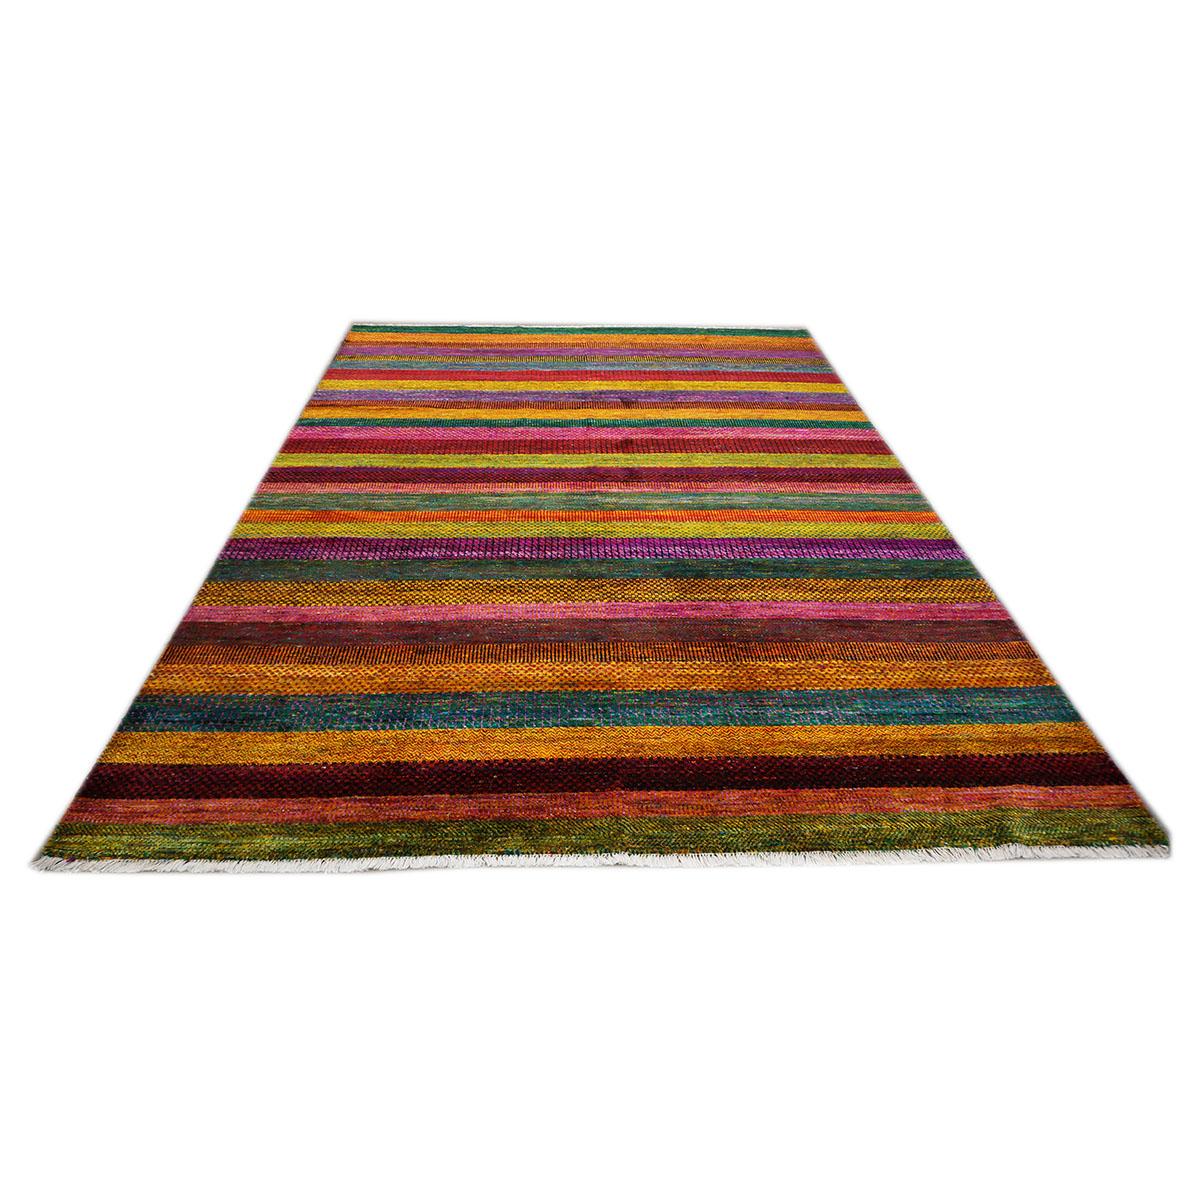  Ashly Fine Rugs presents an Indian Silk Ikat 9x12 rug. Sari Silk dresses are collected, unraveled, and the threads are spun into yarns suitable for hand-knotted rug weaving. The variables are random of where the colors will fall into these unique